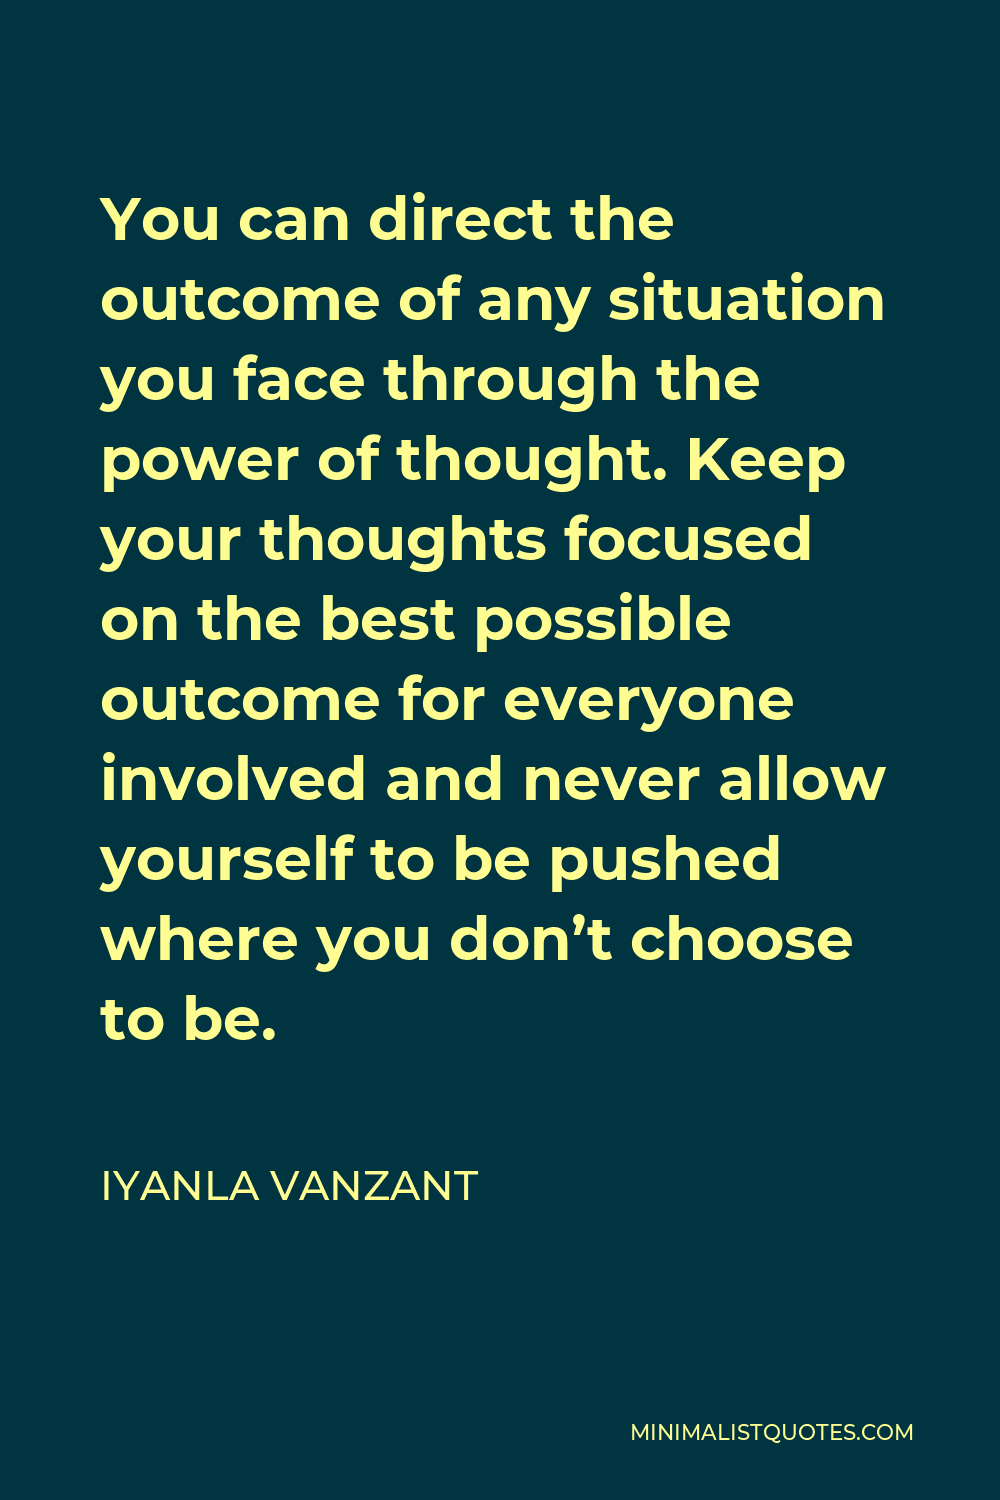 Iyanla Vanzant Quote - You can direct the outcome of any situation you face through the power of thought. Keep your thoughts focused on the best possible outcome for everyone involved and never allow yourself to be pushed where you don’t choose to be.